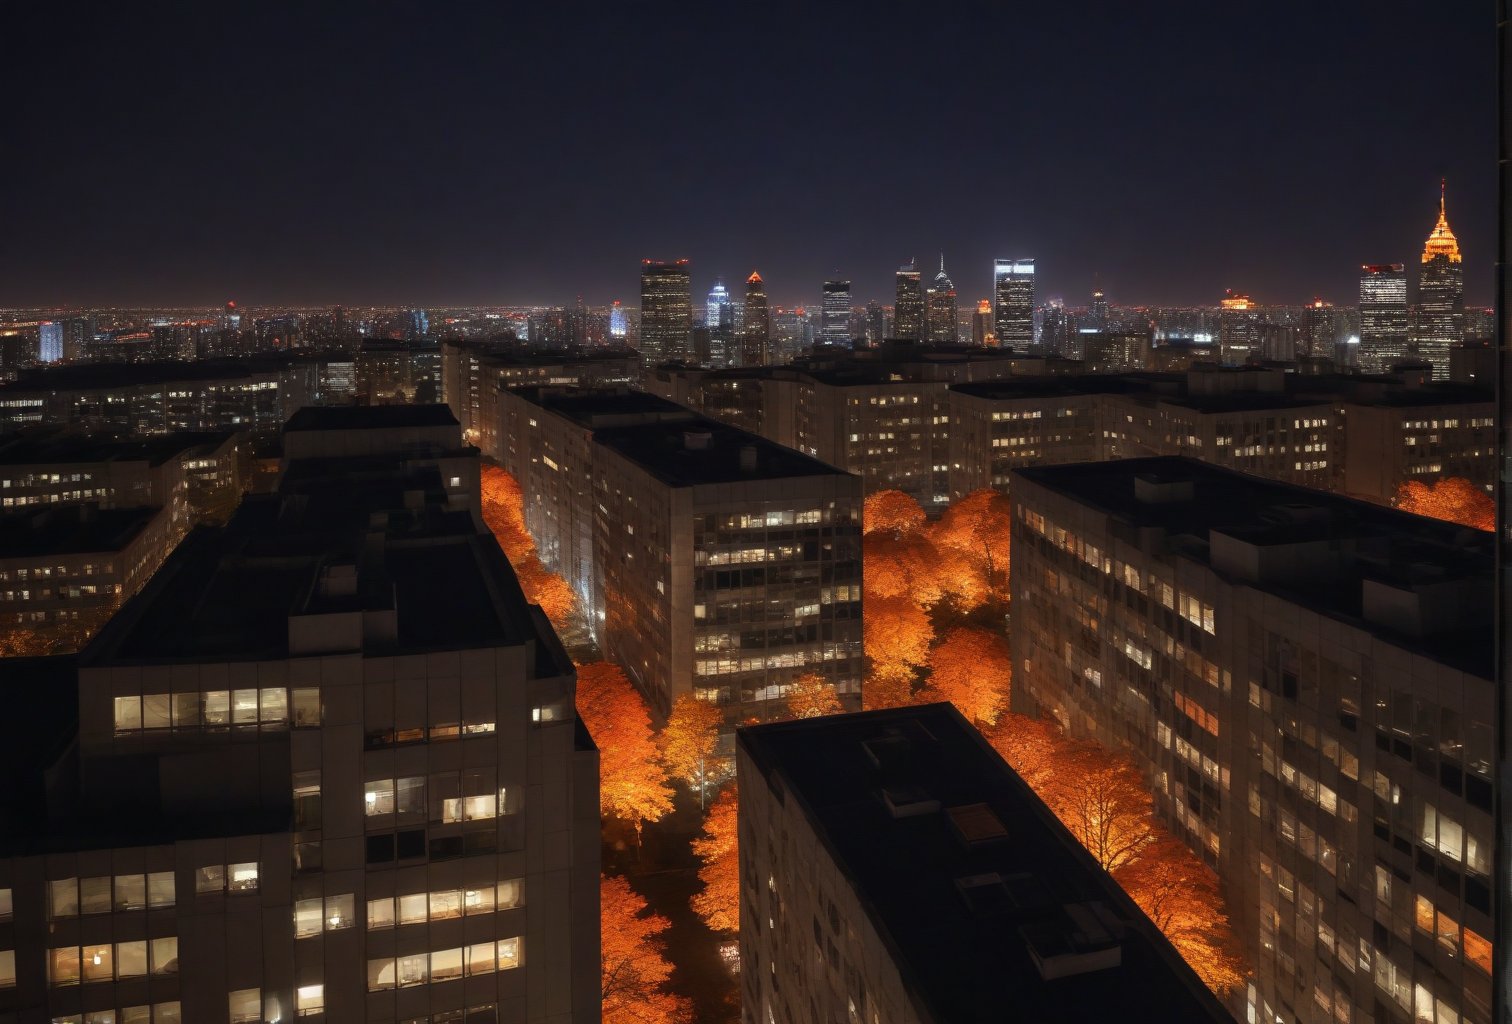 Night, autumn, view from the roof of a skyscraper, skyscrapers with orange windows, lanterns illuminate the foliage of trees and are reflected in the glass of skyscrapers